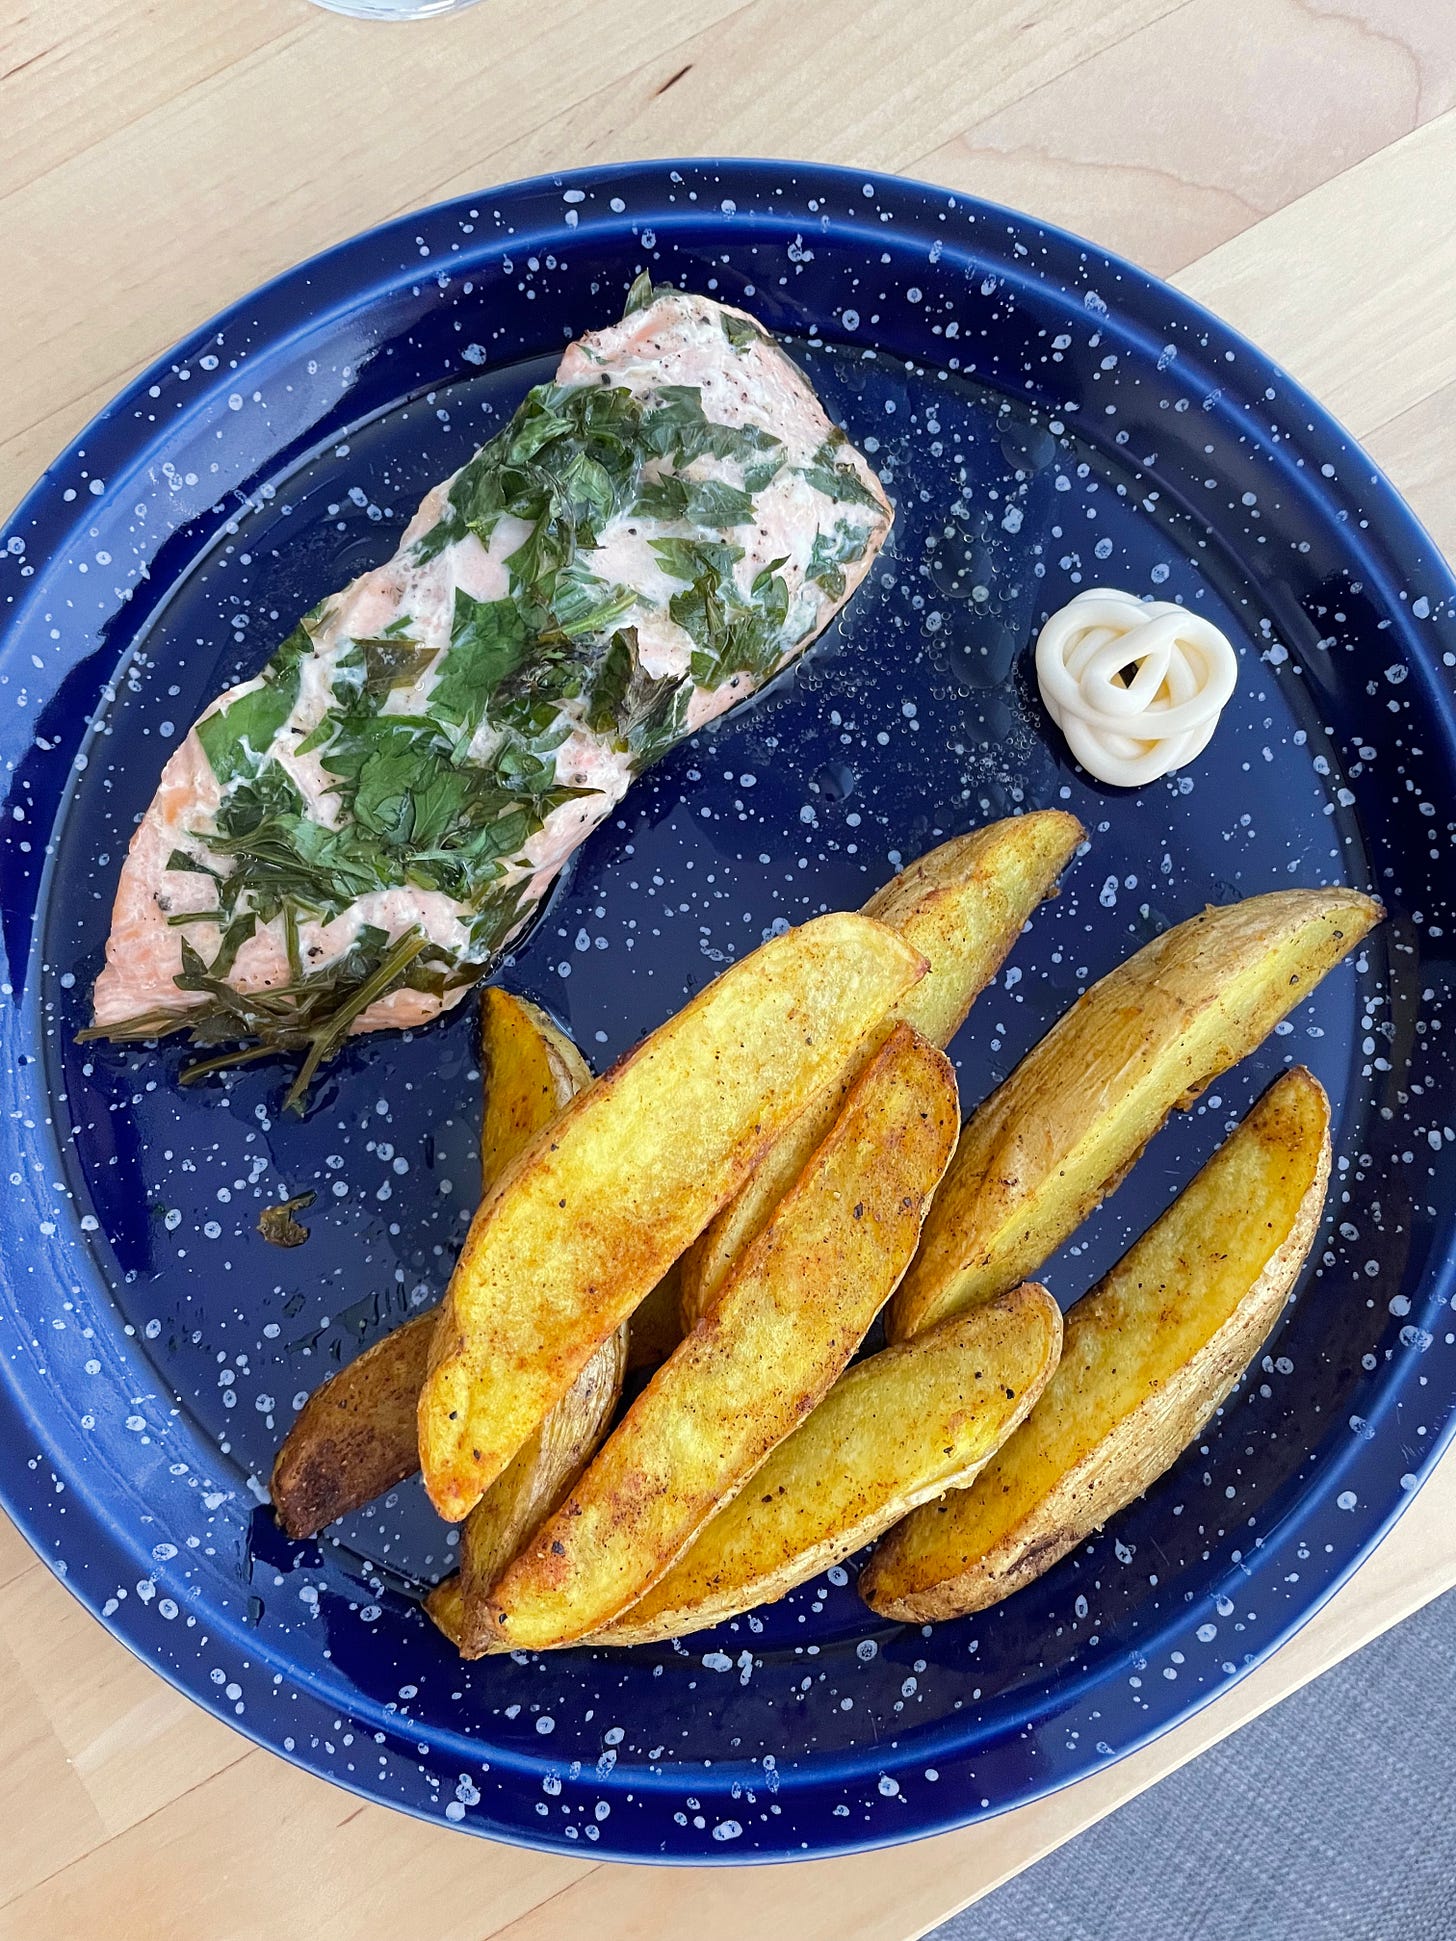 Baked salmon with butter, parsley, spiced wedges and a squirt of kewpie mayo.